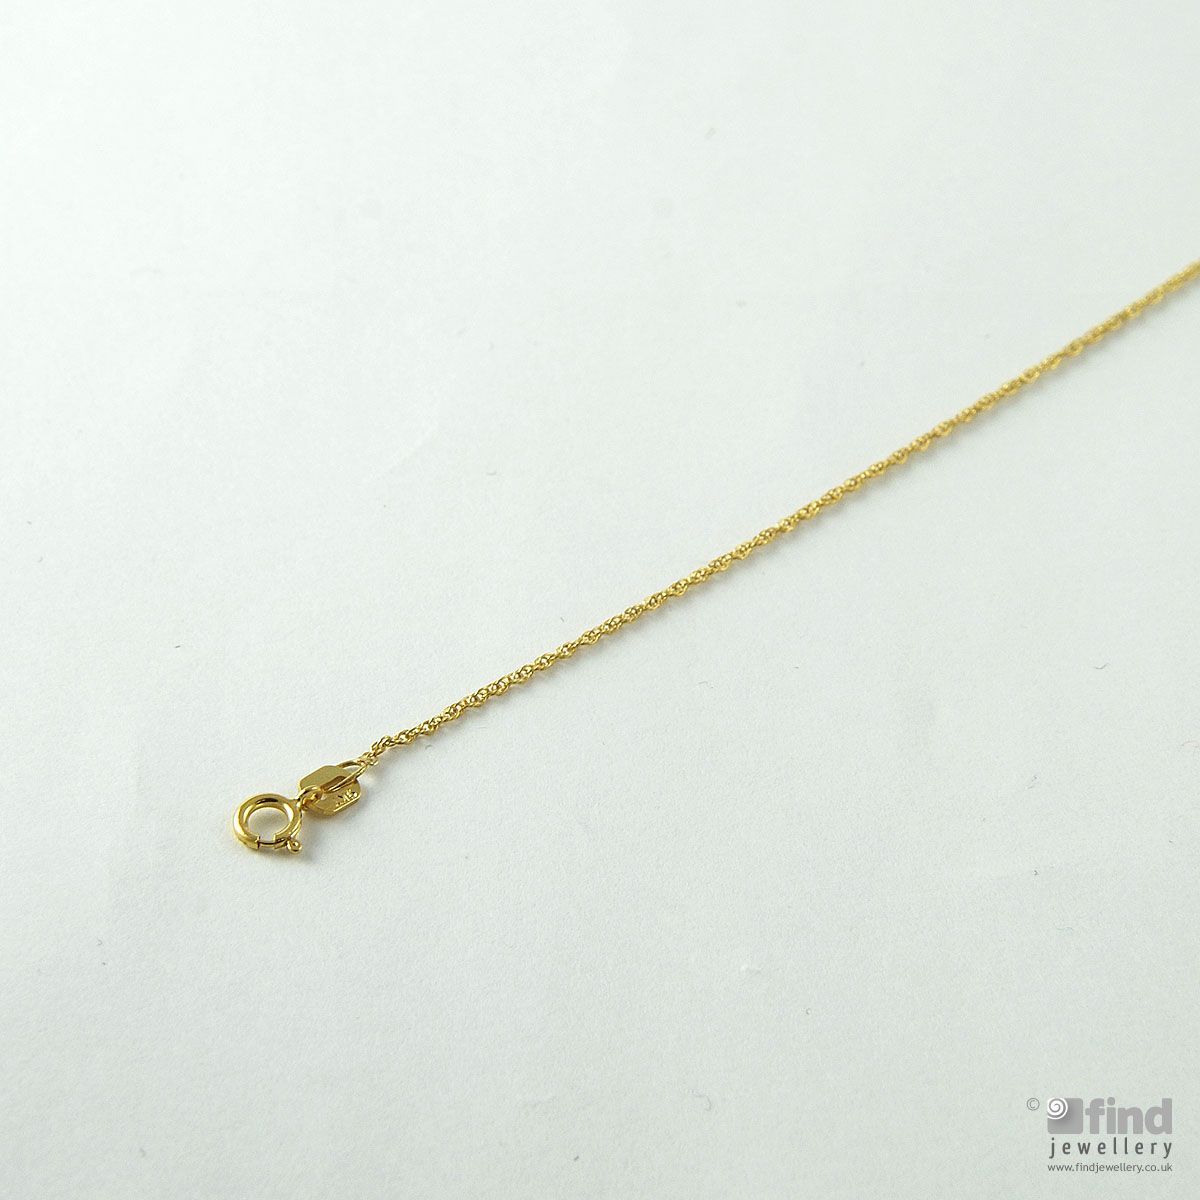 Unbranded Fine 9ct Gold Prince of Wales Chain 20 Inches